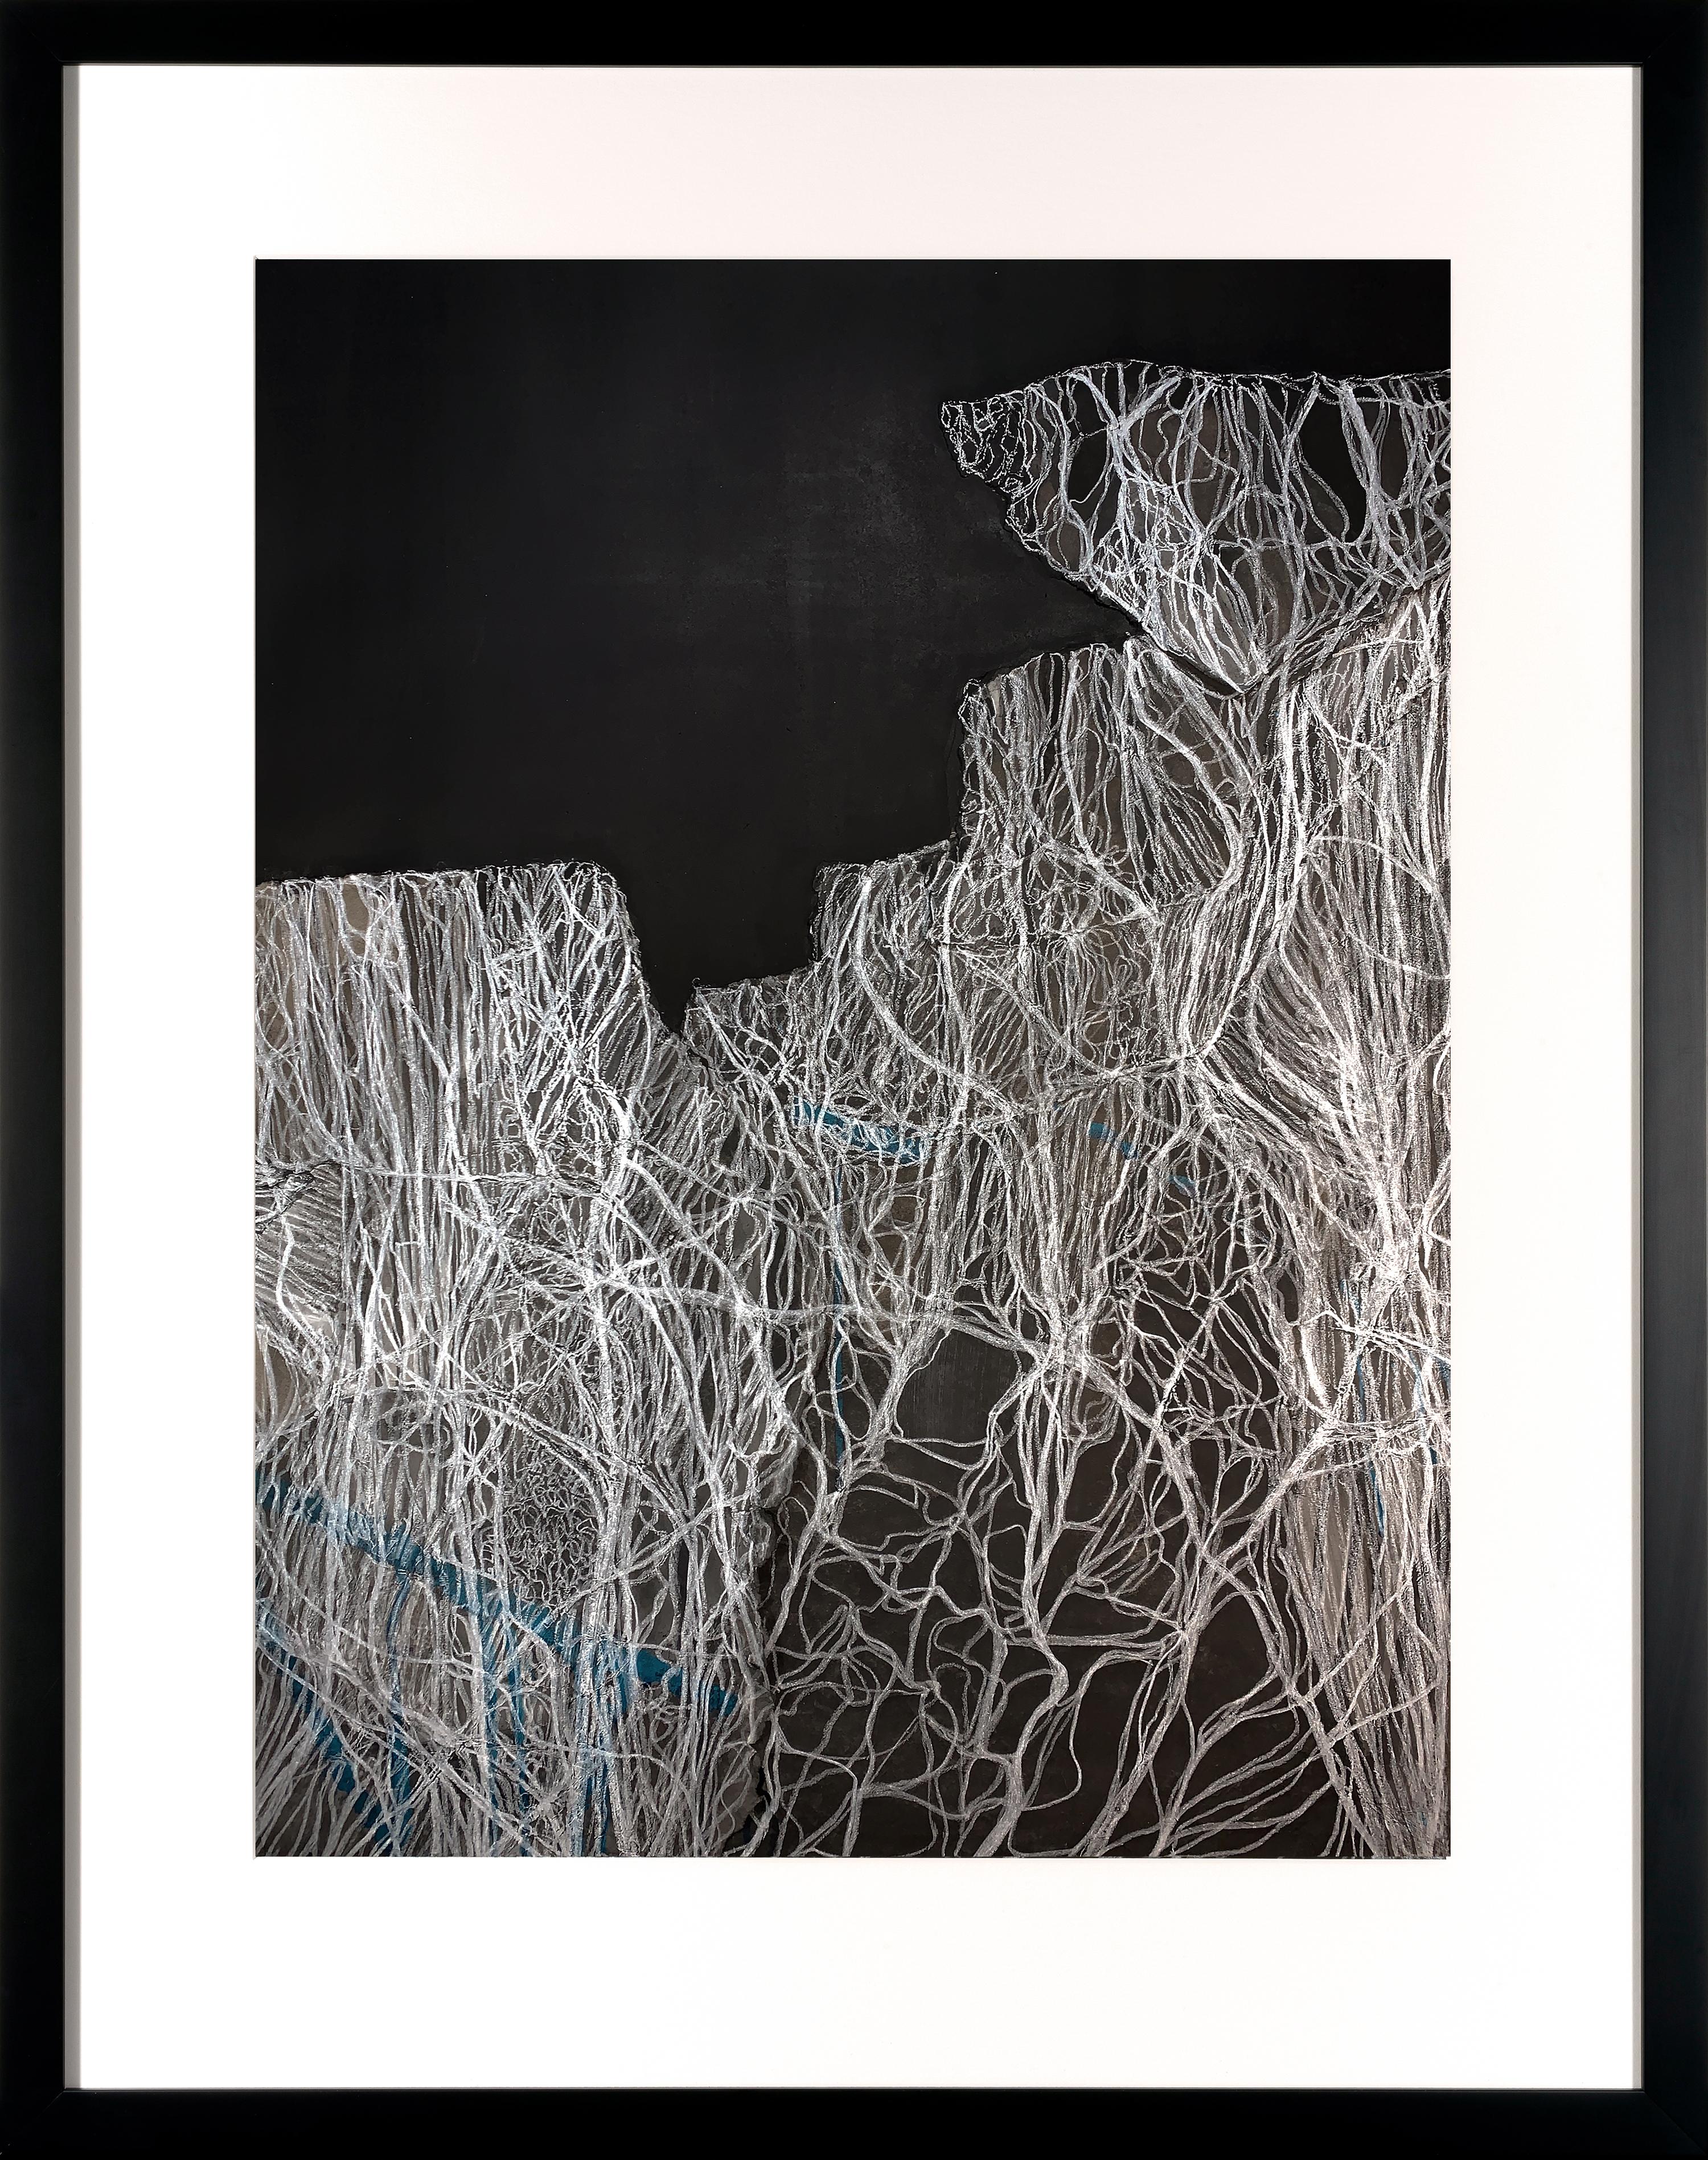 Fragments of Memory III - Contemporary Abstract Work on Paper Black, White Teal